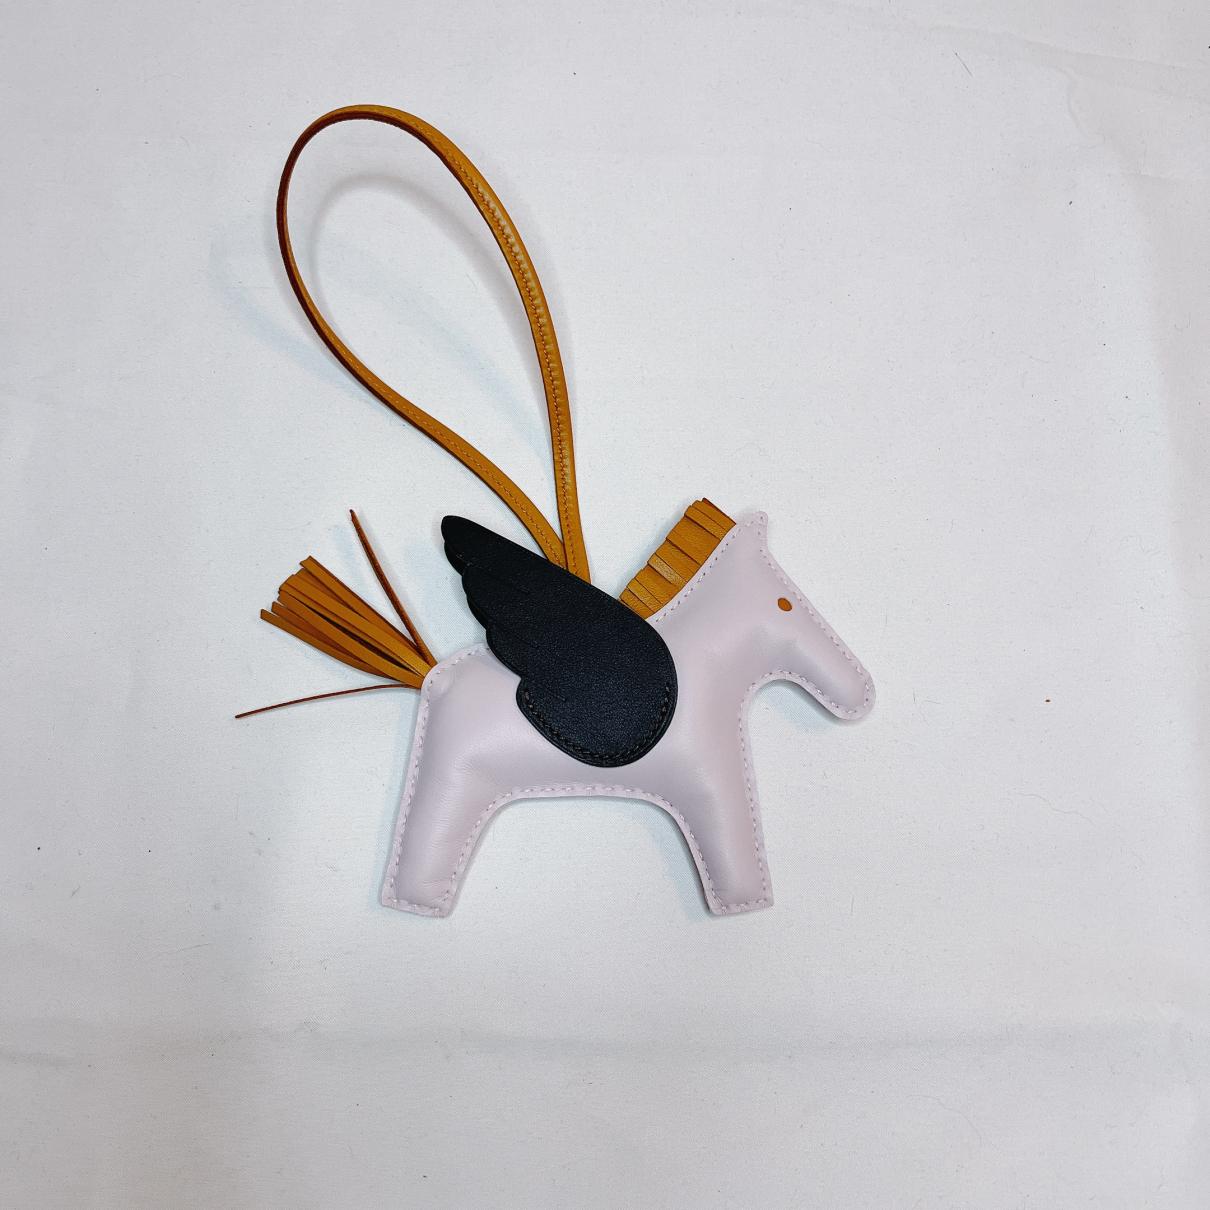 Rodeo leather bag charm - 3